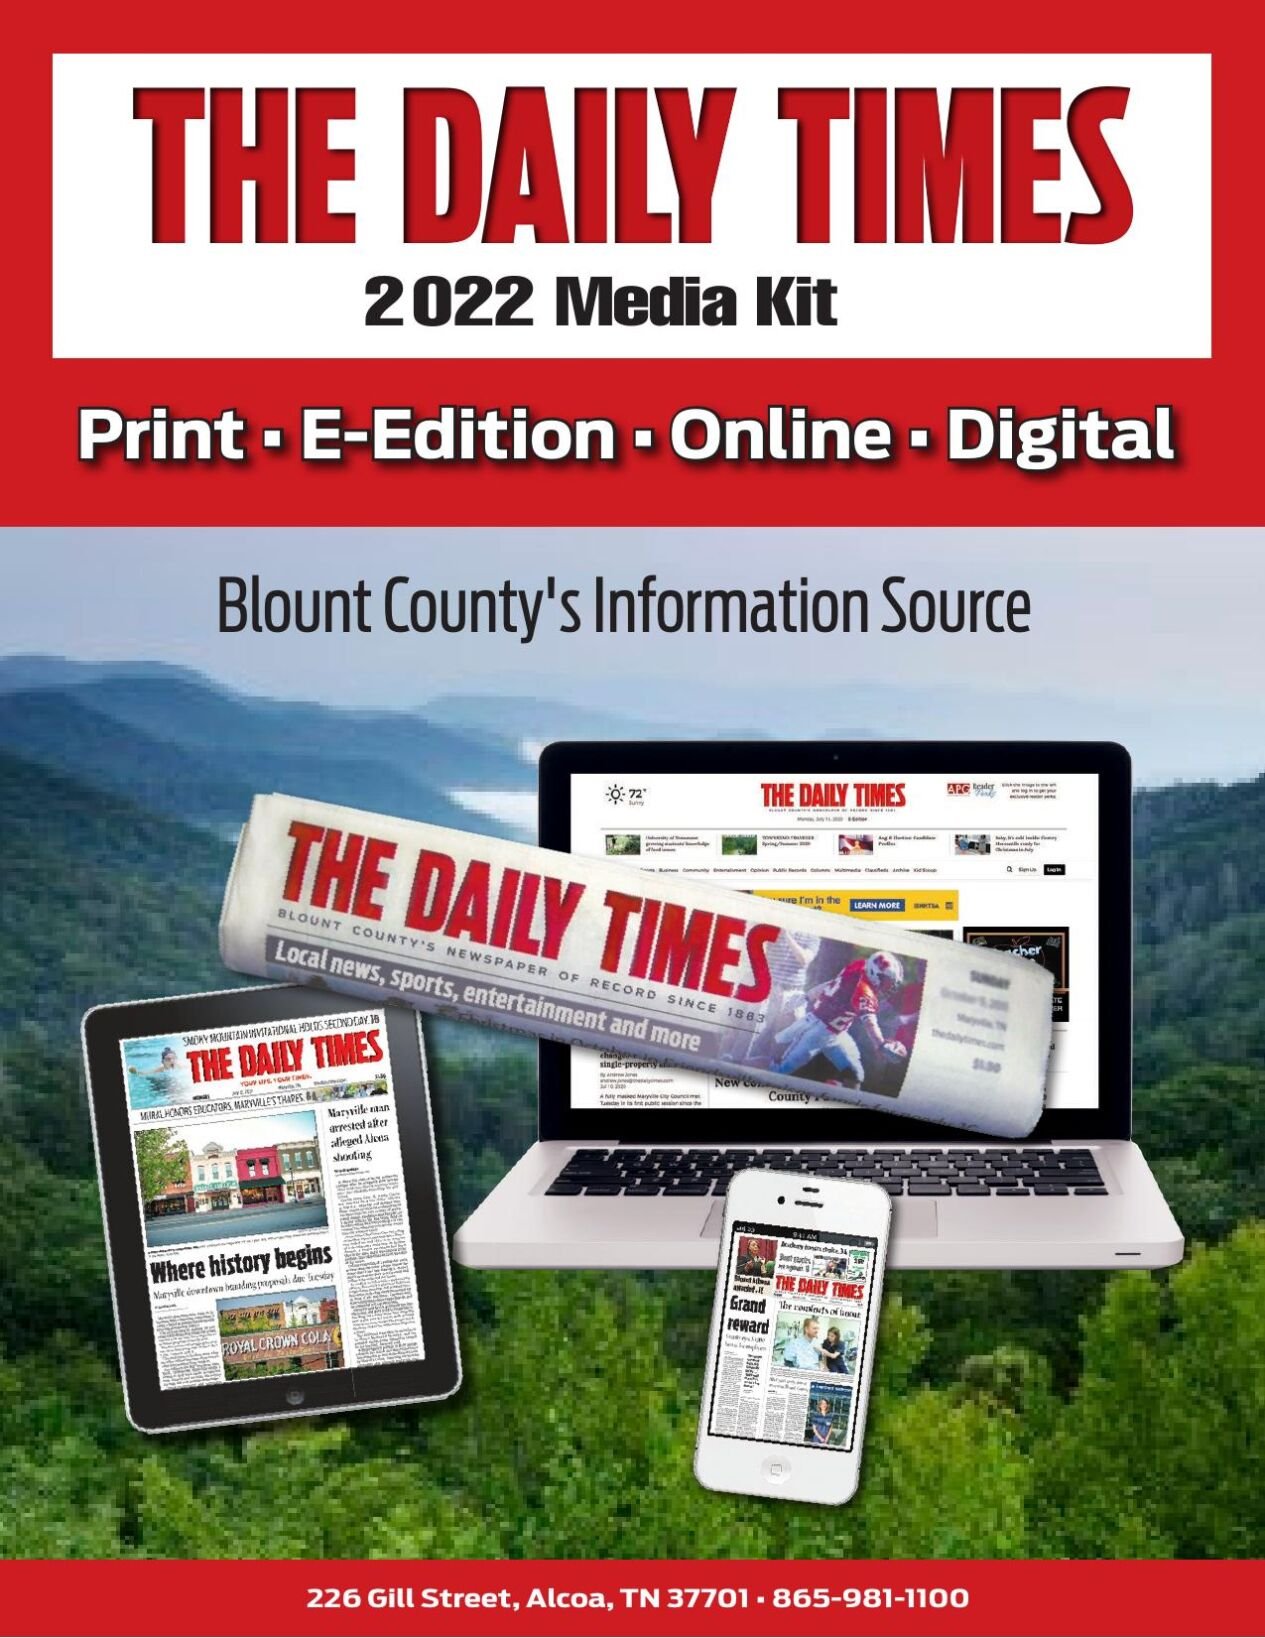 The Daily Times Media Kit